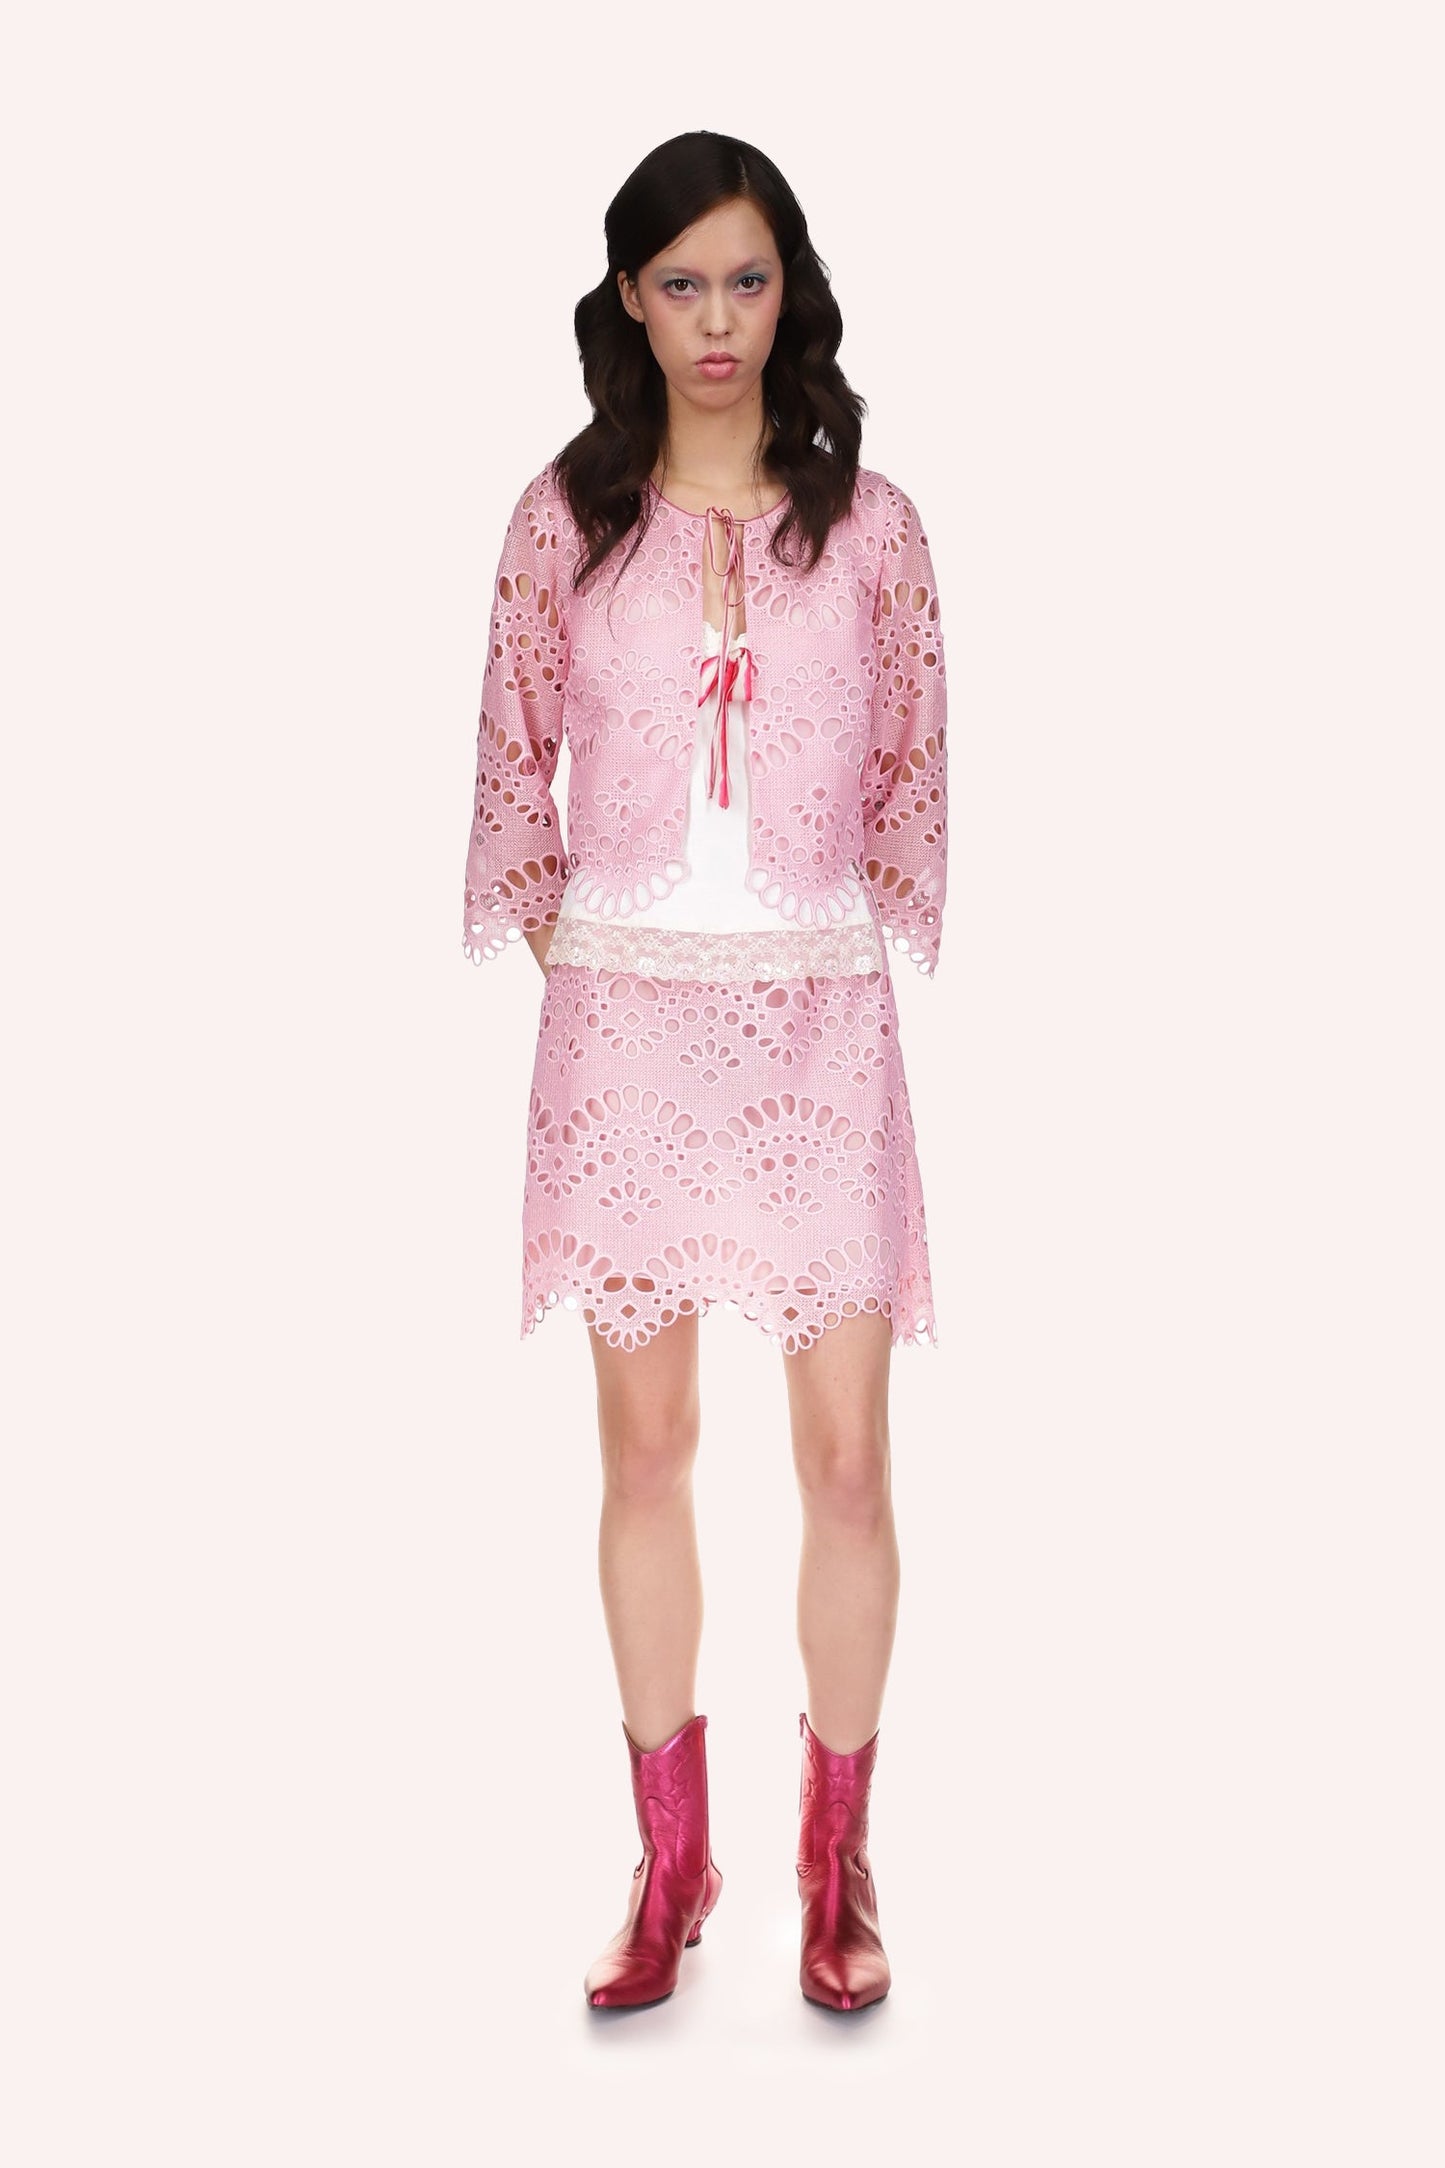 Eyelet Jacket, pink, ribbon at collar, mid-size sleeves, above hips long, rounded bottom front